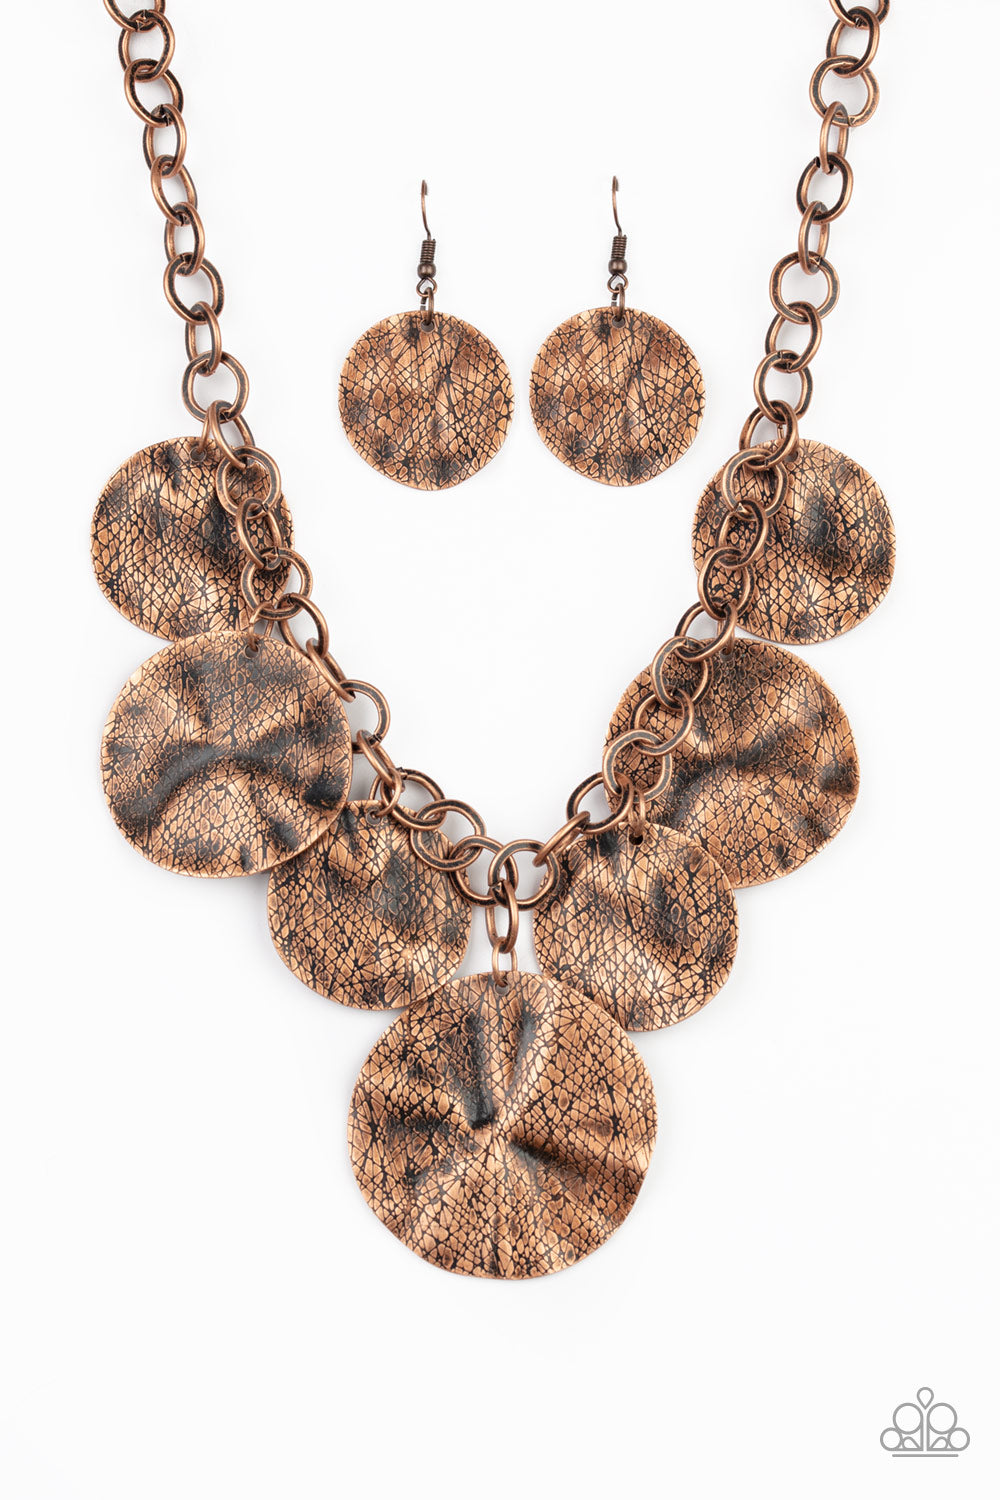 Barely Scratched The Surface - Copper Fashion Necklace - Paparazzi Accessories - Scratched in antiqued shimmer, warped copper discs swing from the bottom of a thick copper chain, creating a bold fringe below the collar. Features an adjustable clasp closure. Sold as one individual necklace.